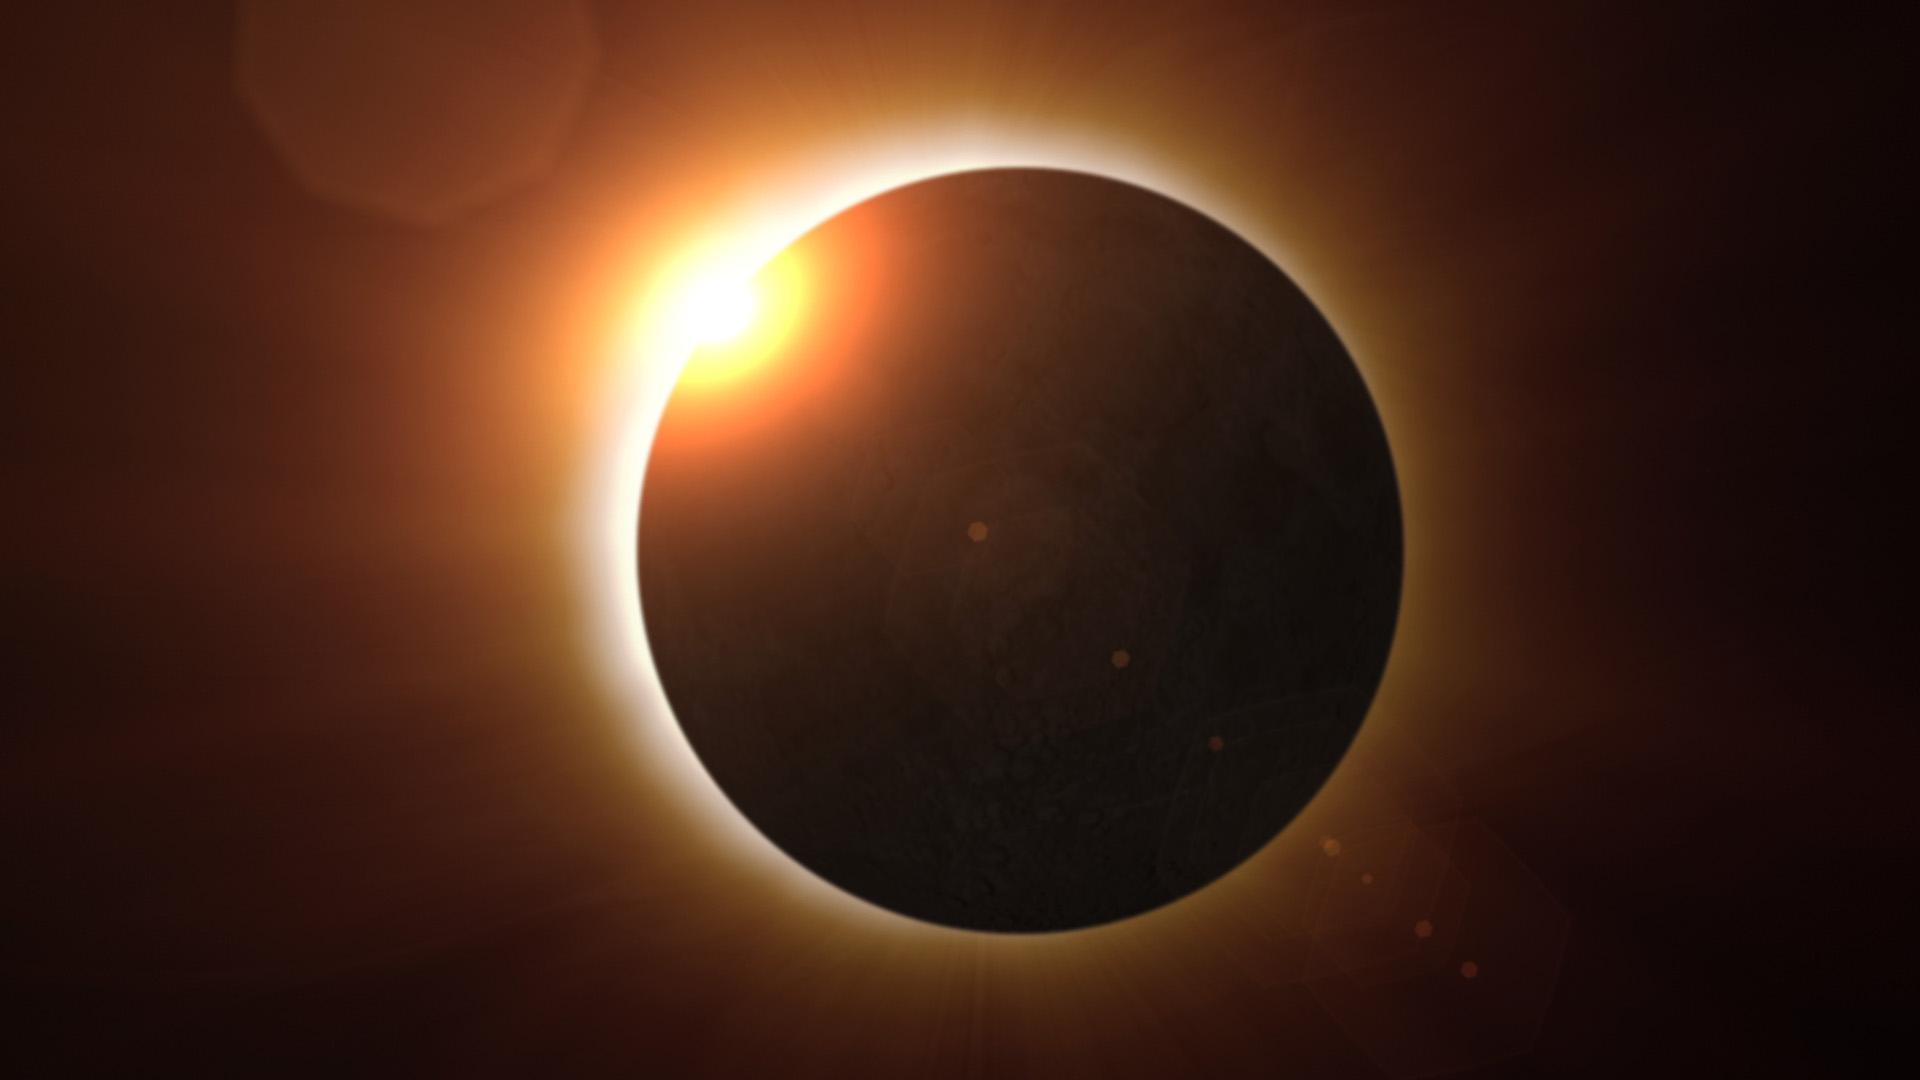 News. What to Expect When Viewing the Eclipse